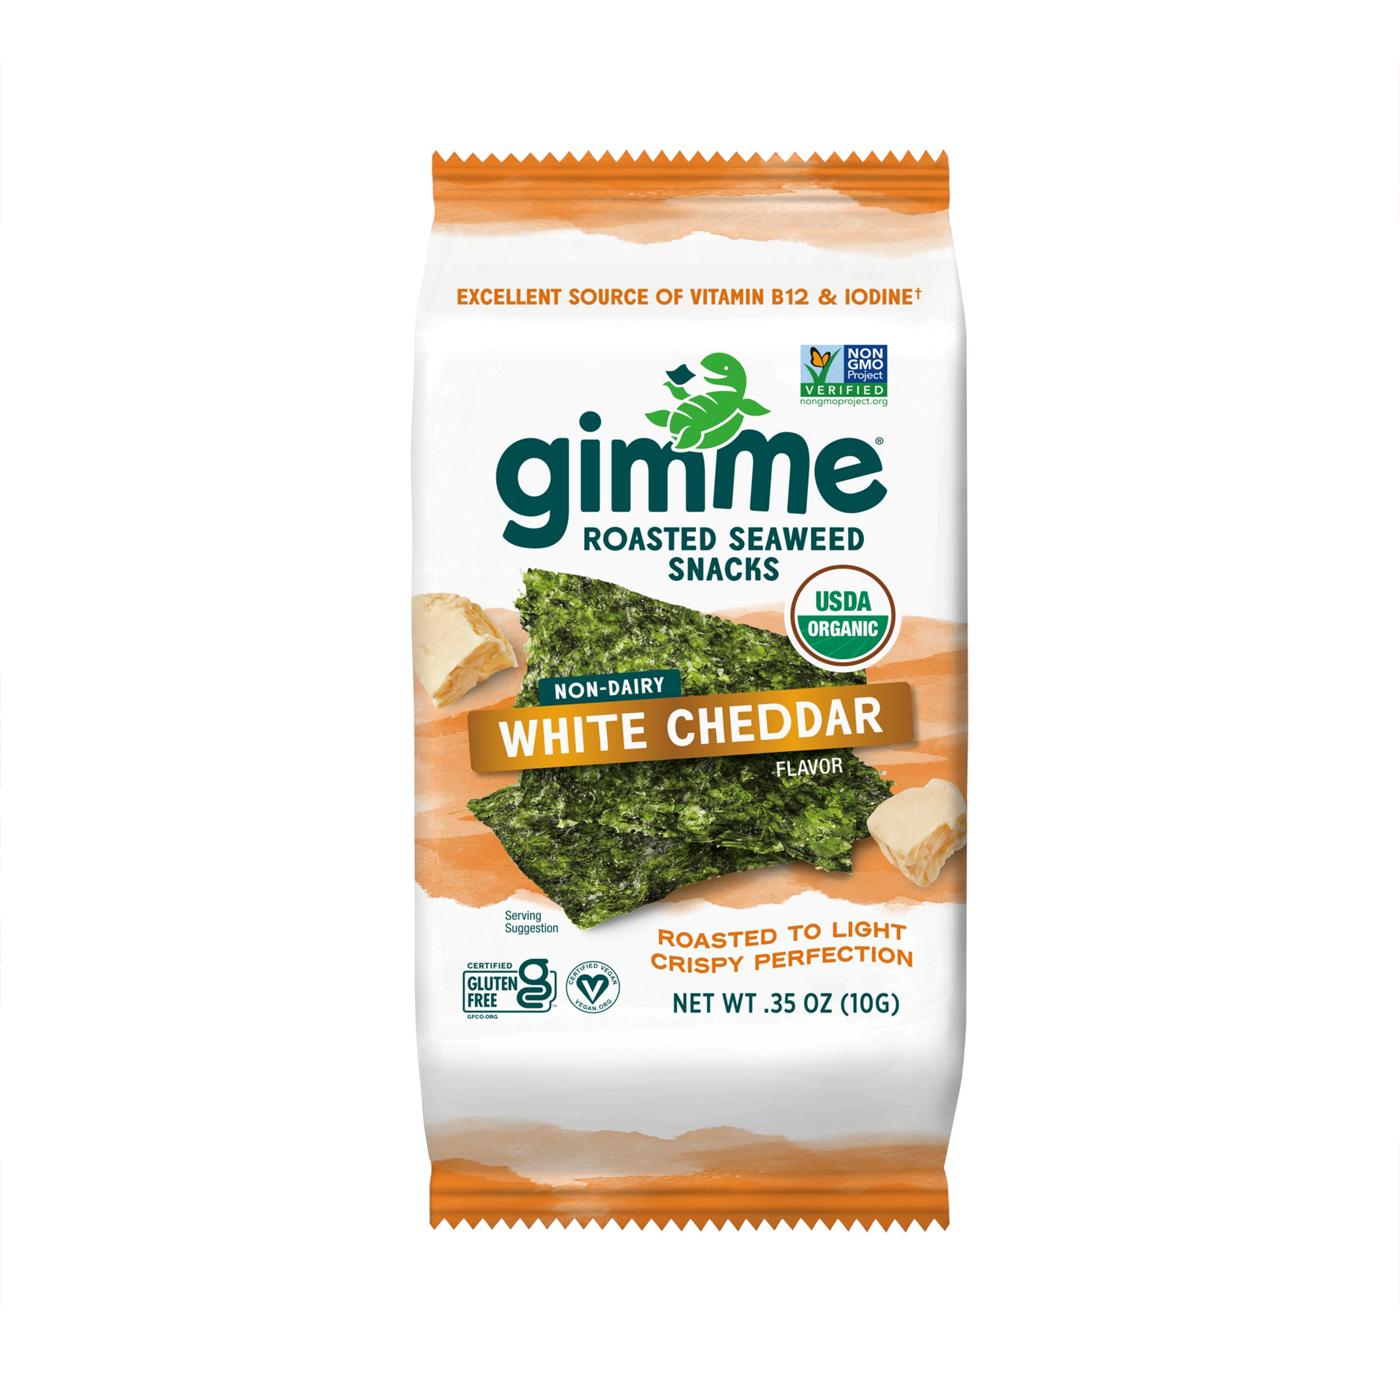 Gimme Roasted Seaweed Snack White Cheddar; image 1 of 8